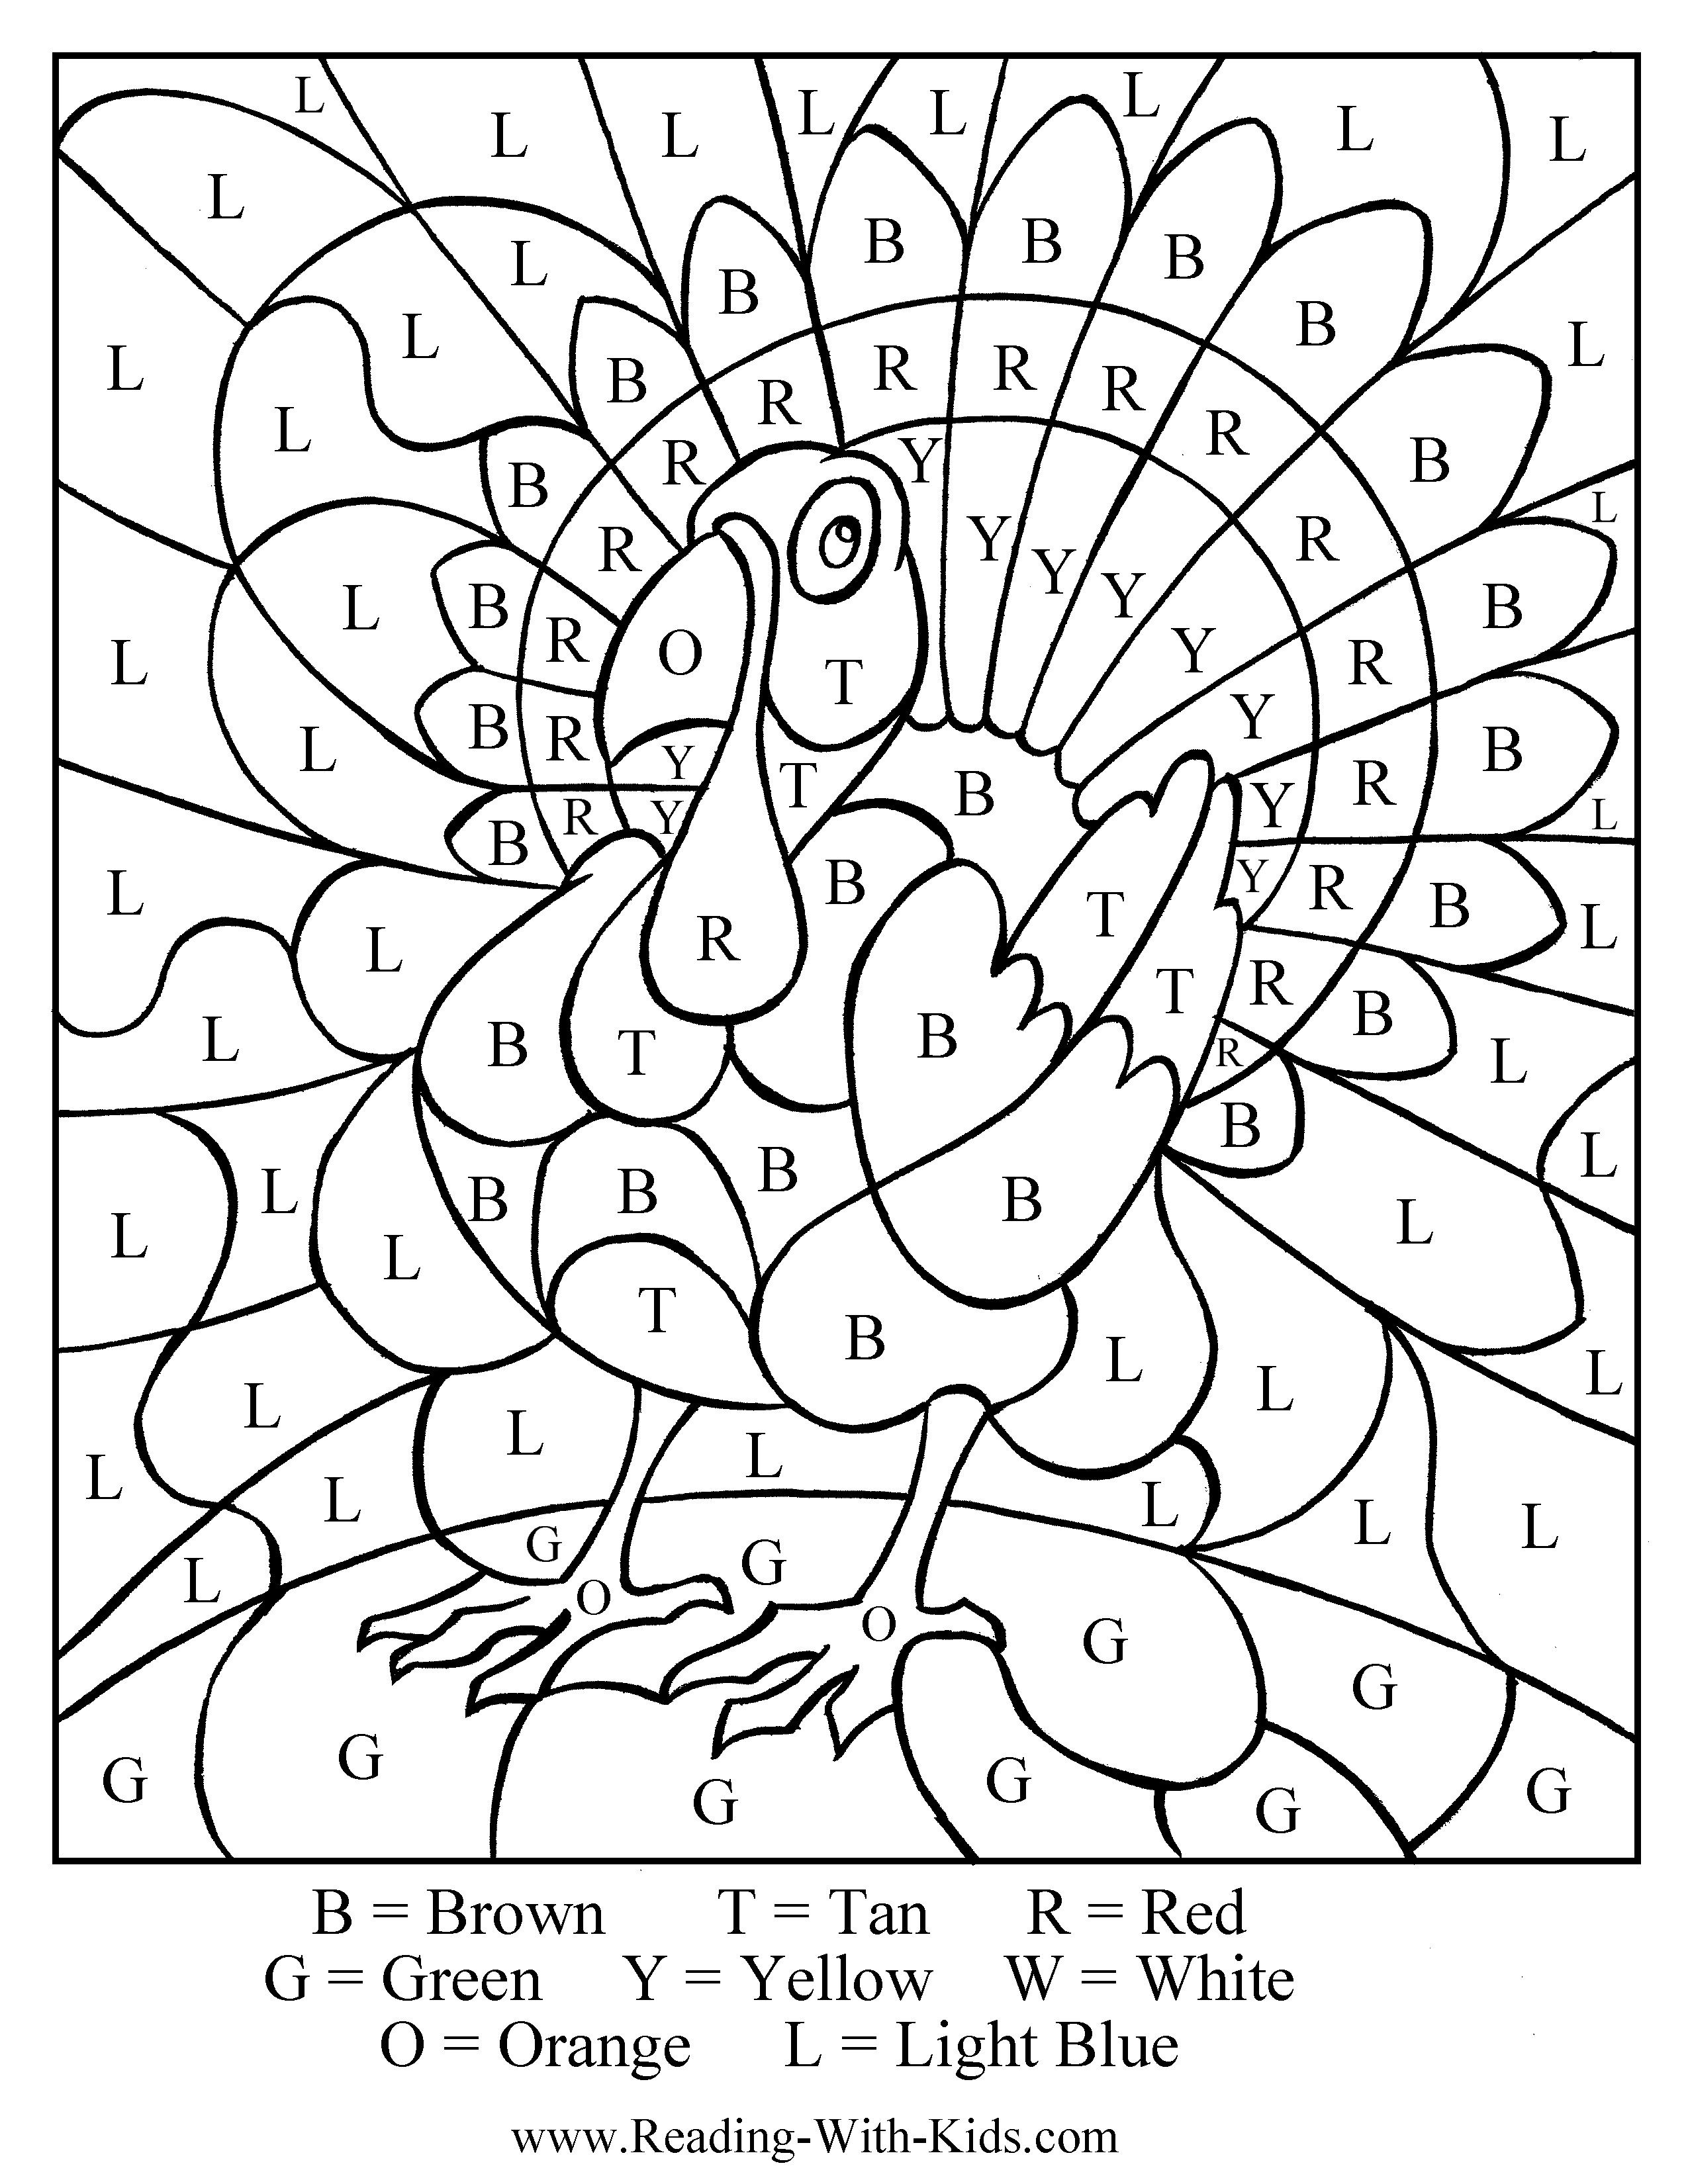 ooodles of Thanksgiving printables, puzzles, games for kids